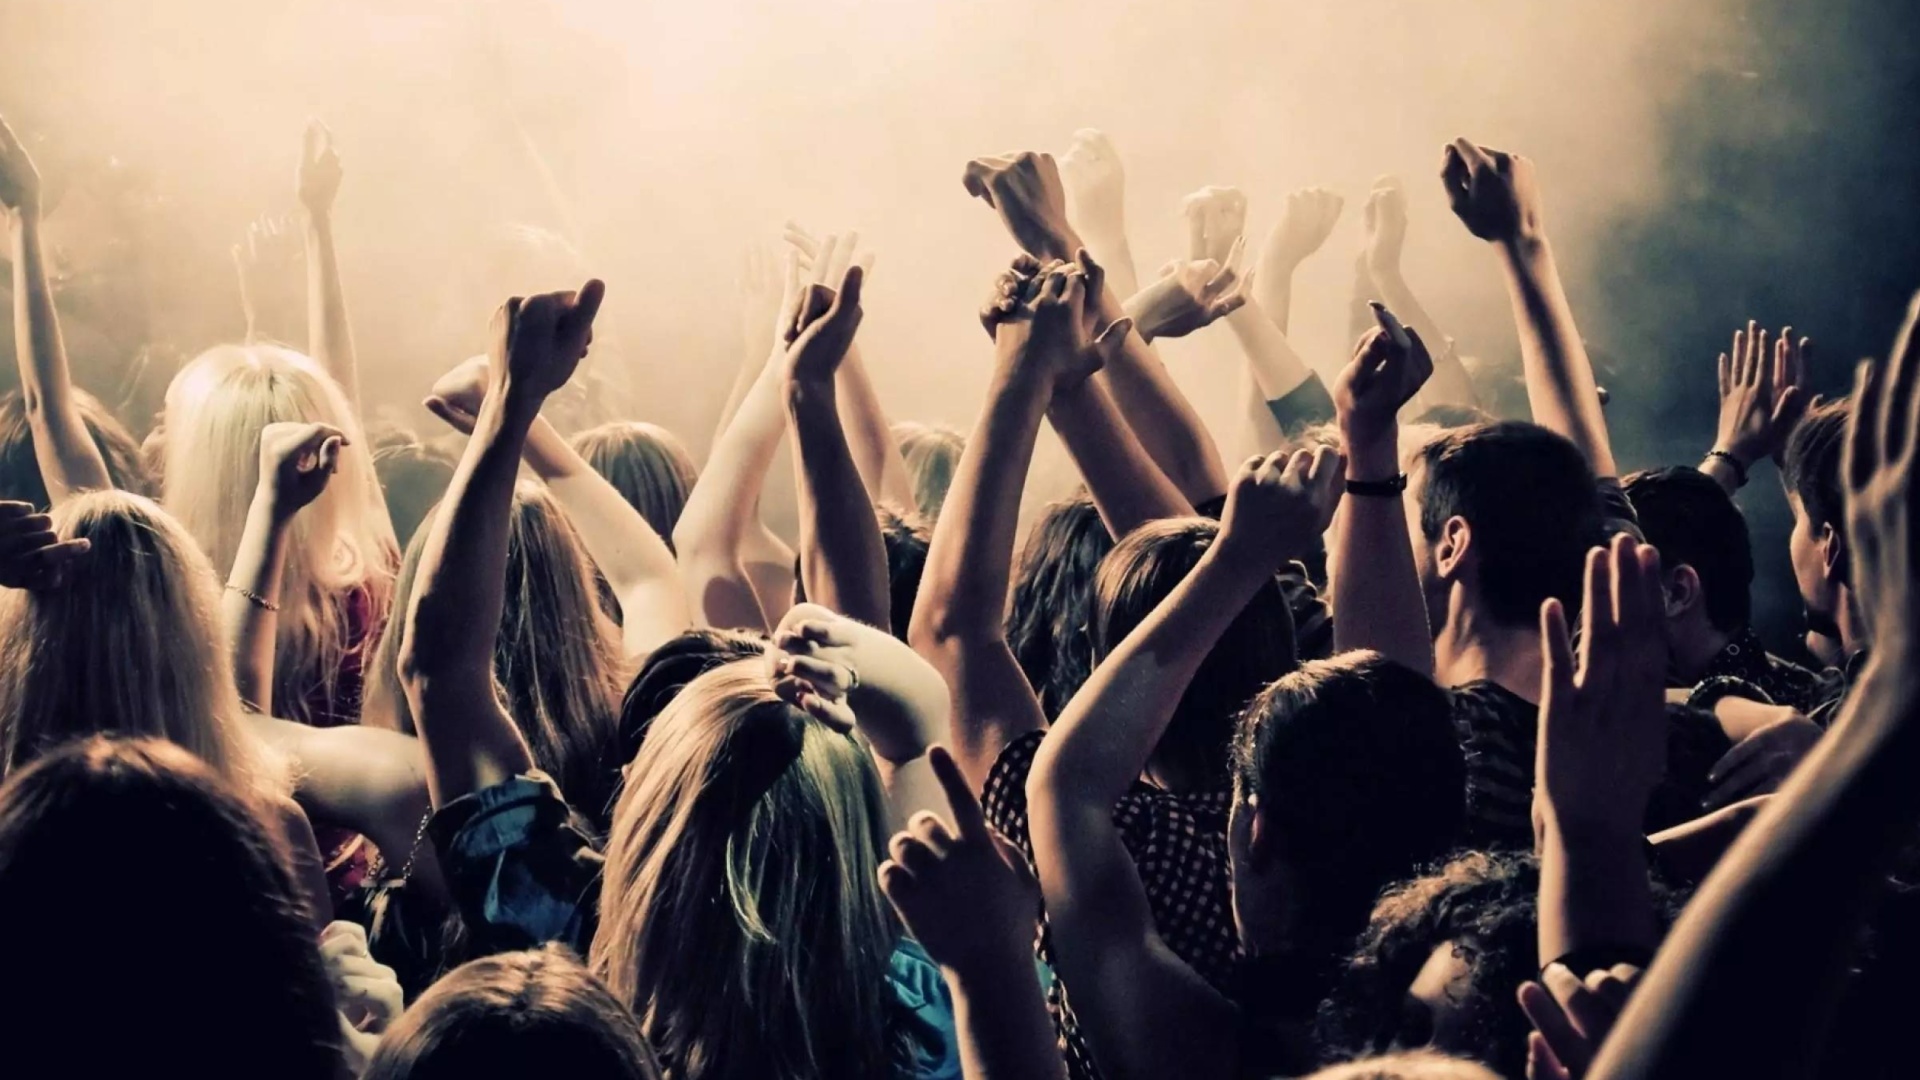 Crazy Party in Night Club, Put your hands up wallpaper 1920x1080